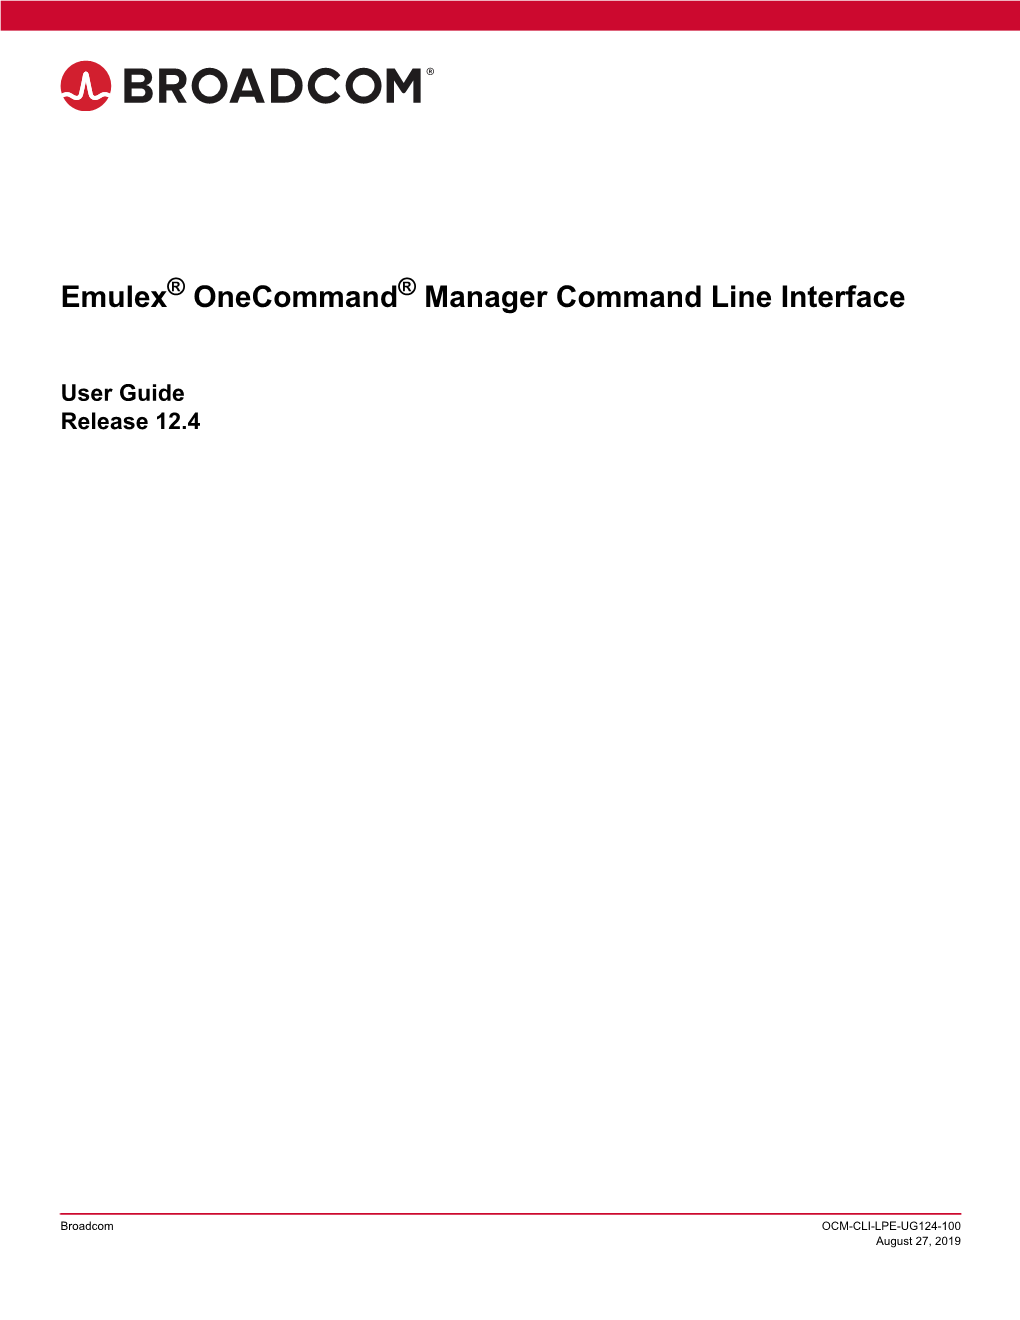 Emulex Onecommand Manager Command Line Interface User Guide Table of Contents